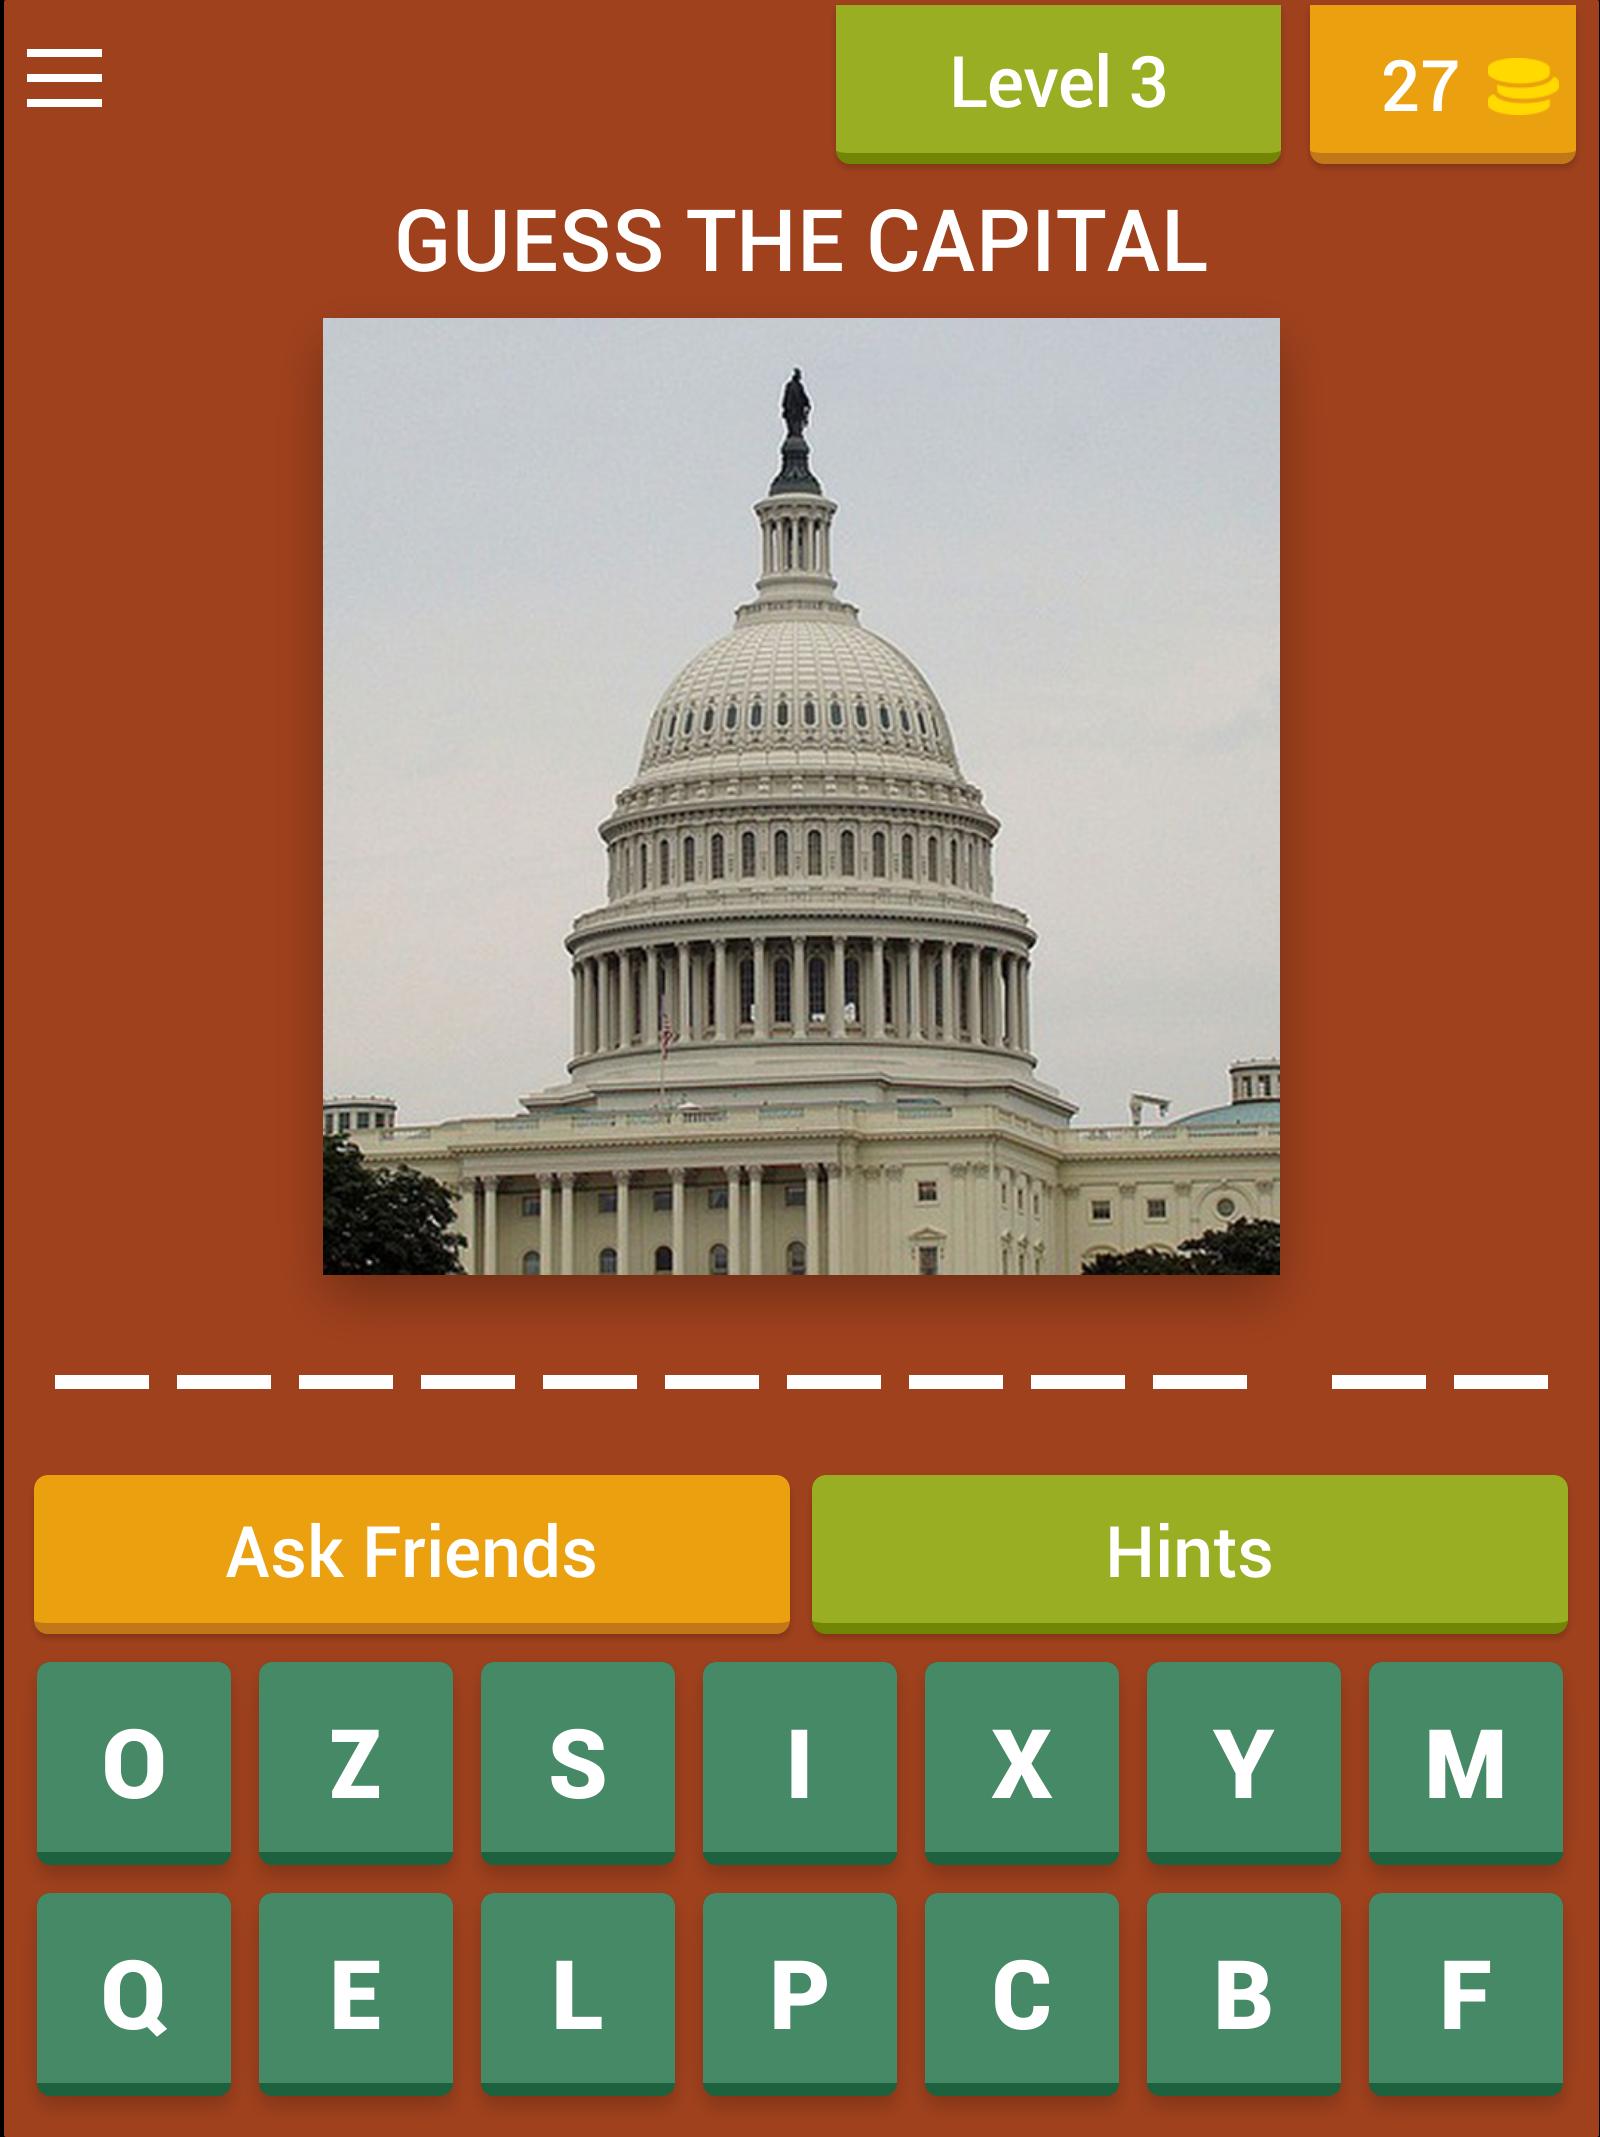 Capital city quiz for Android - APK Download